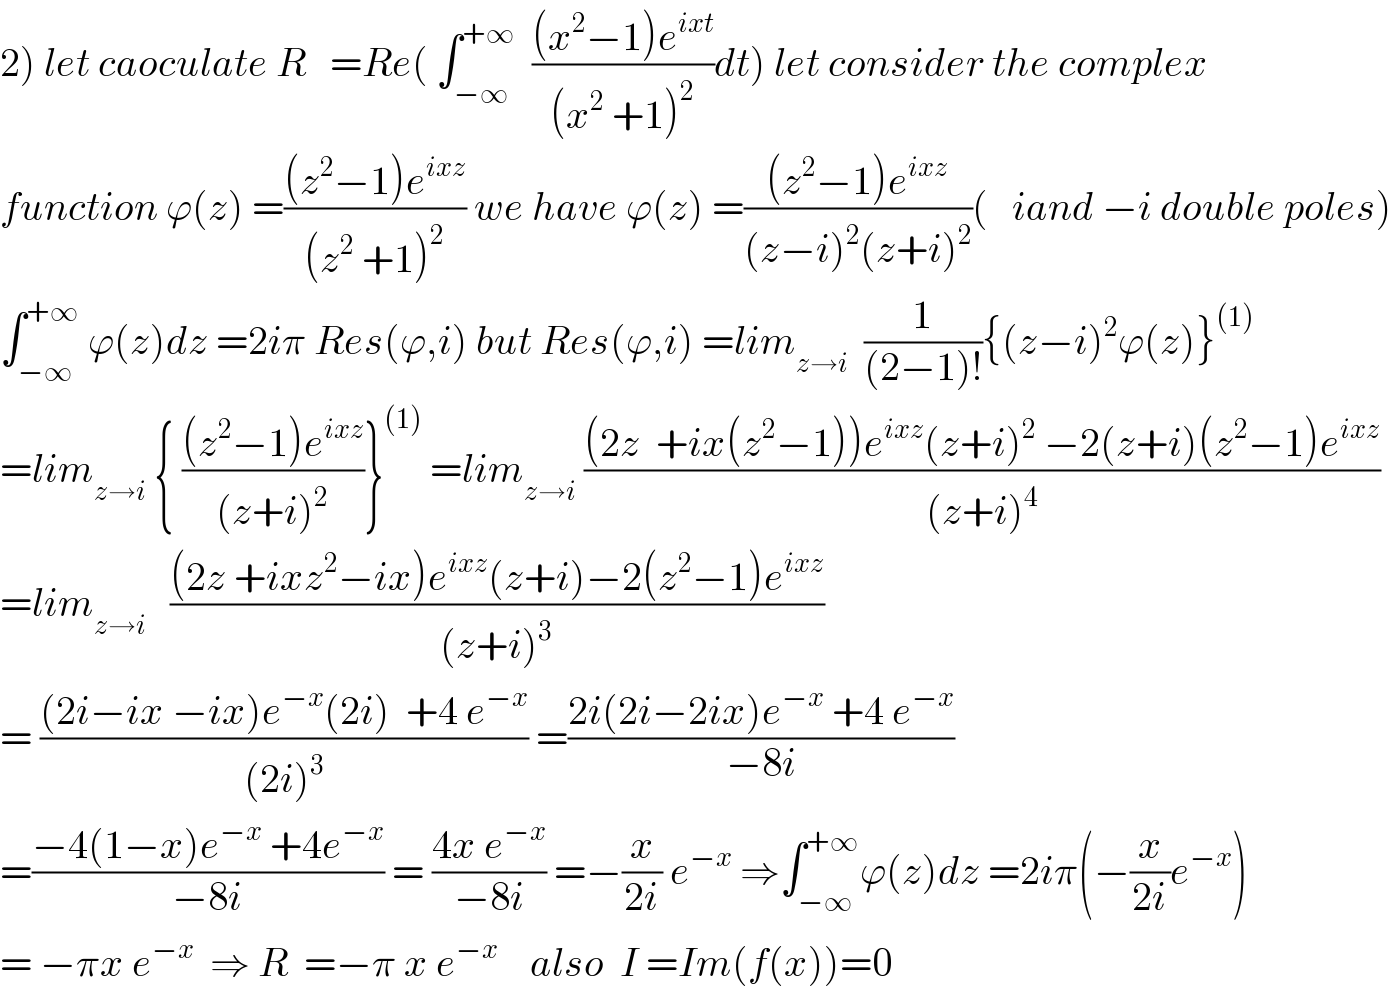 2) let caoculate R   =Re( ∫_(−∞) ^(+∞)   (((x^2 −1)e^(ixt) )/((x^2  +1)^2 ))dt) let consider the complex  function ϕ(z) =(((z^2 −1)e^(ixz) )/((z^2  +1)^2 )) we have ϕ(z) =(((z^2 −1)e^(ixz) )/((z−i)^2 (z+i)^2 ))(   iand −i double poles)  ∫_(−∞) ^(+∞)  ϕ(z)dz =2iπ Res(ϕ,i) but Res(ϕ,i) =lim_(z→i)   (1/((2−1)!)){(z−i)^2 ϕ(z)}^((1))   =lim_(z→i)  { (((z^2 −1)e^(ixz) )/((z+i)^2 ))}^((1))  =lim_(z→i)  (((2z  +ix(z^2 −1))e^(ixz) (z+i)^2  −2(z+i)(z^2 −1)e^(ixz) )/((z+i)^4 ))  =lim_(z→i)    (((2z +ixz^2 −ix)e^(ixz) (z+i)−2(z^2 −1)e^(ixz) )/((z+i)^3 ))  = (((2i−ix −ix)e^(−x) (2i)  +4 e^(−x) )/((2i)^3 )) =((2i(2i−2ix)e^(−x)  +4 e^(−x) )/(−8i))  =((−4(1−x)e^(−x)  +4e^(−x) )/(−8i)) = ((4x e^(−x) )/(−8i)) =−(x/(2i)) e^(−x)  ⇒∫_(−∞) ^(+∞) ϕ(z)dz =2iπ(−(x/(2i))e^(−x) )  = −πx e^(−x)   ⇒ R  =−π x e^(−x)     also  I =Im(f(x))=0  